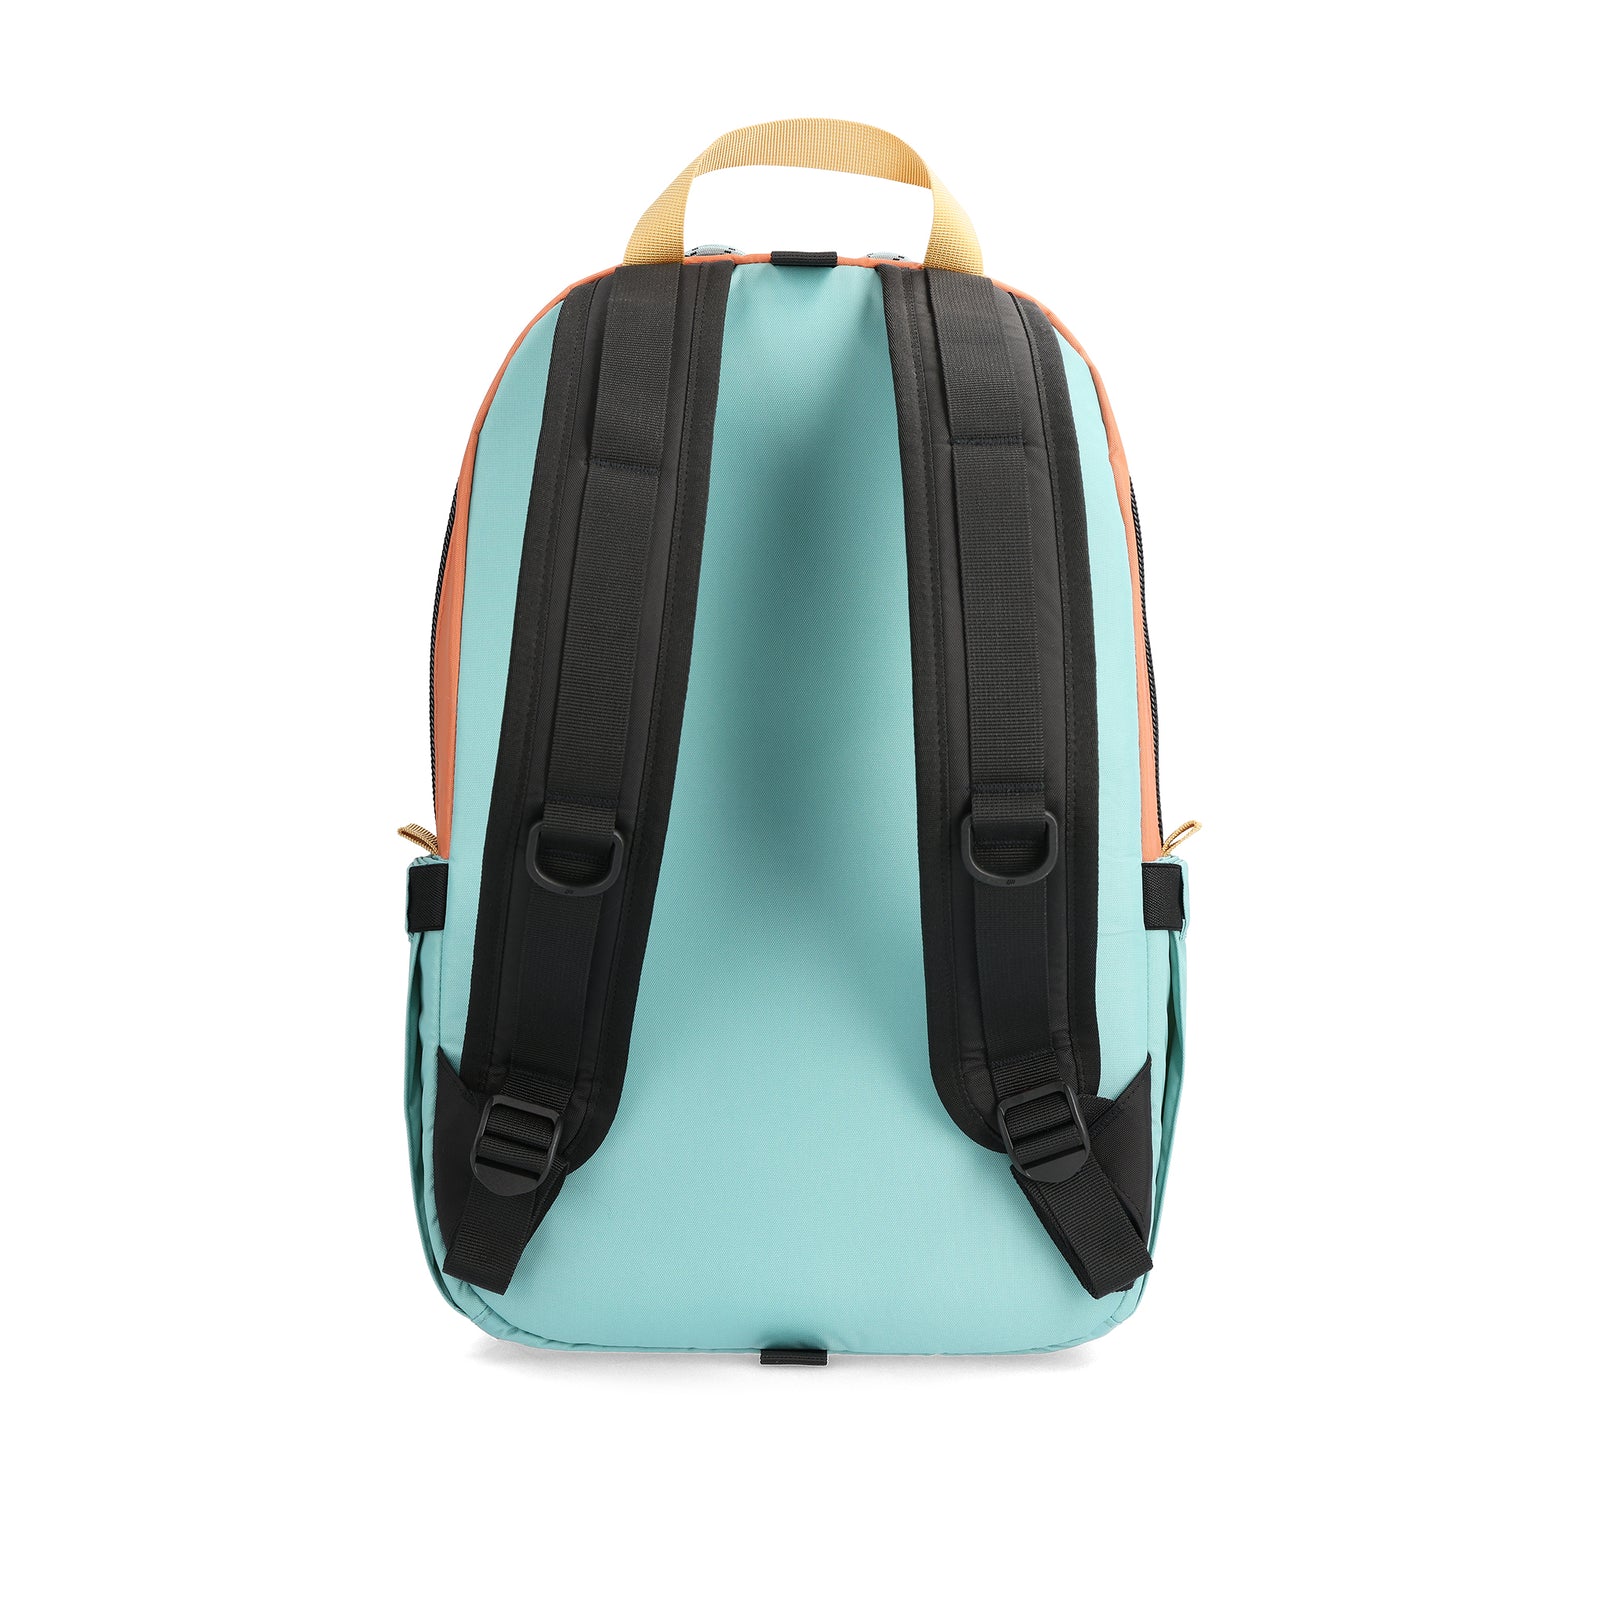 Back View of Topo Designs Light Pack in "Rose / Geode Green"